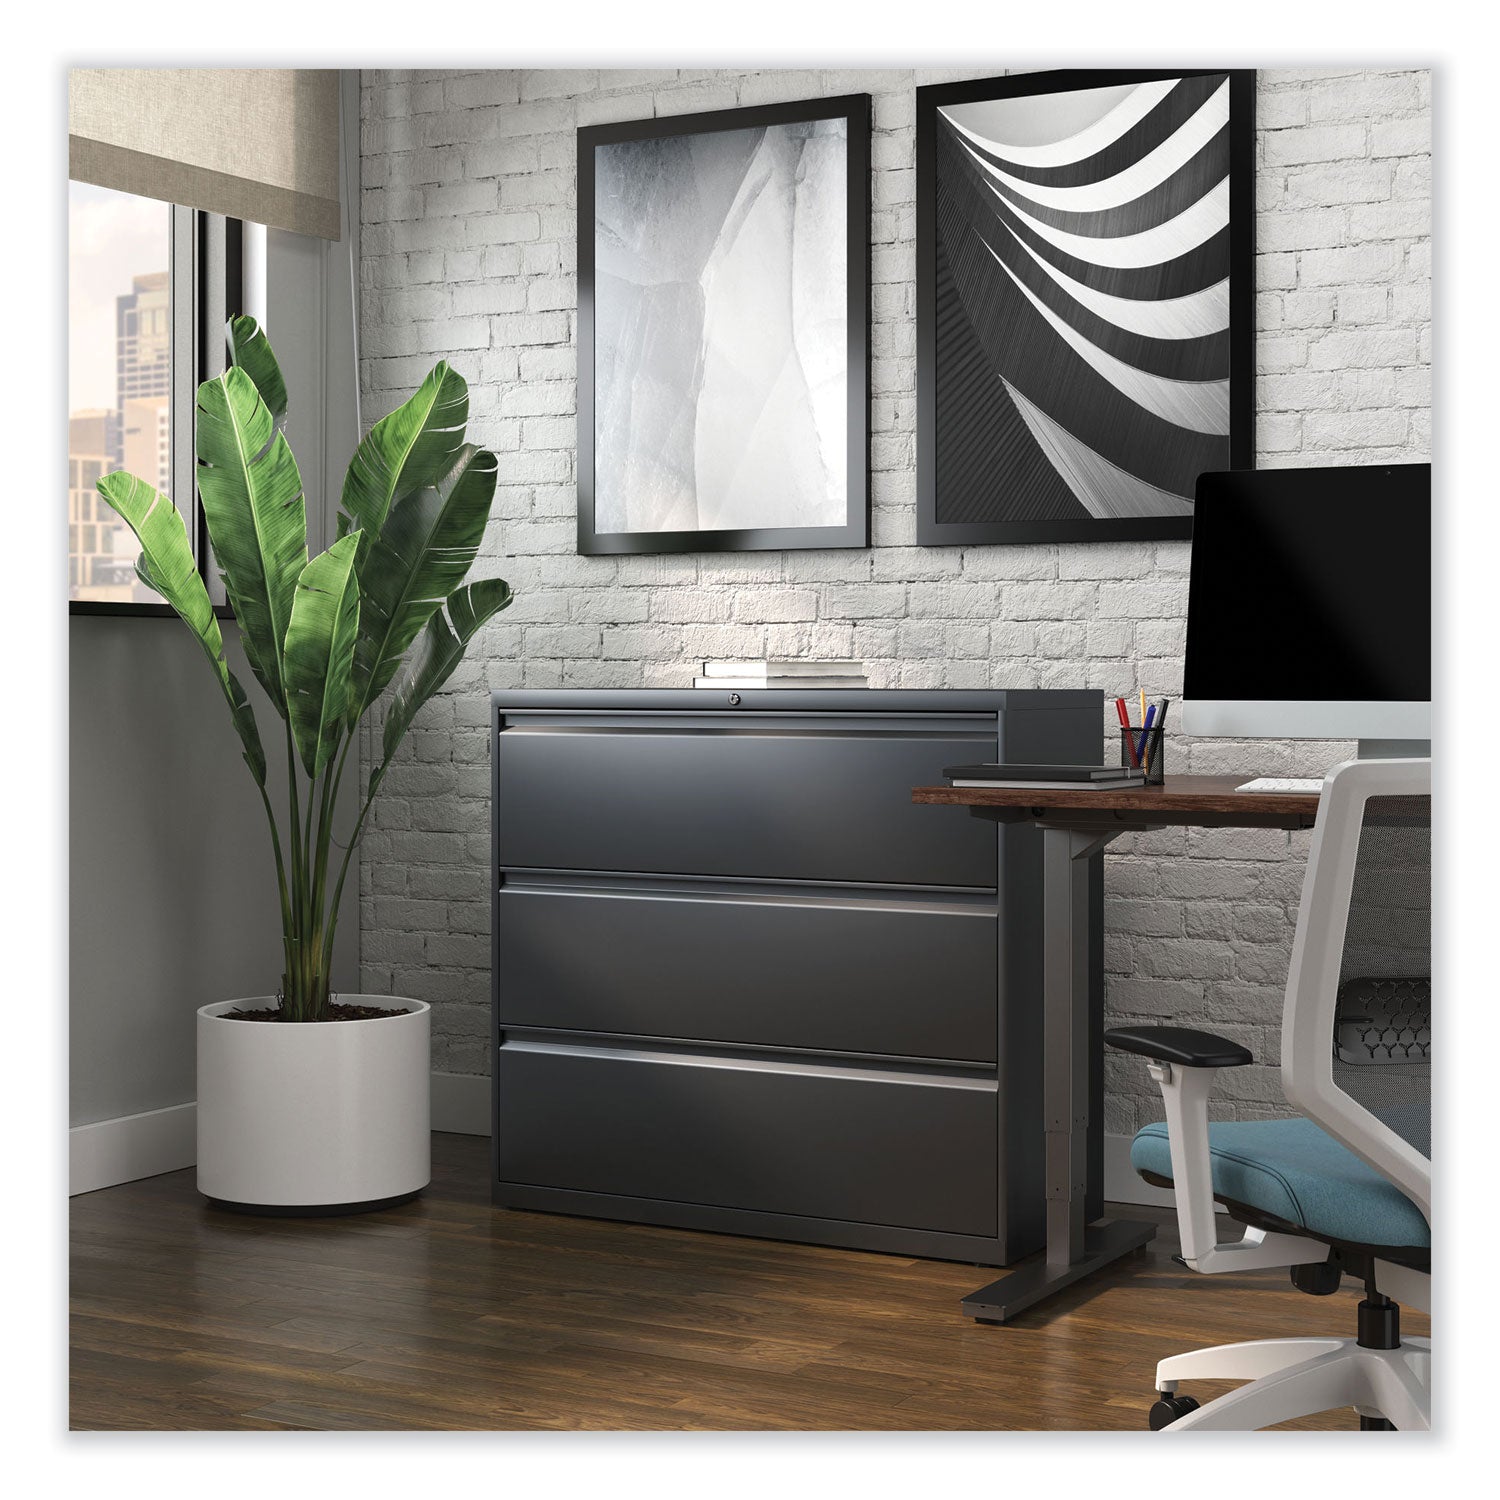 lateral-file-3-legal-letter-a4-a5-size-file-drawers-charcoal-42-x-1863-x-4025_alehlf4241cc - 7